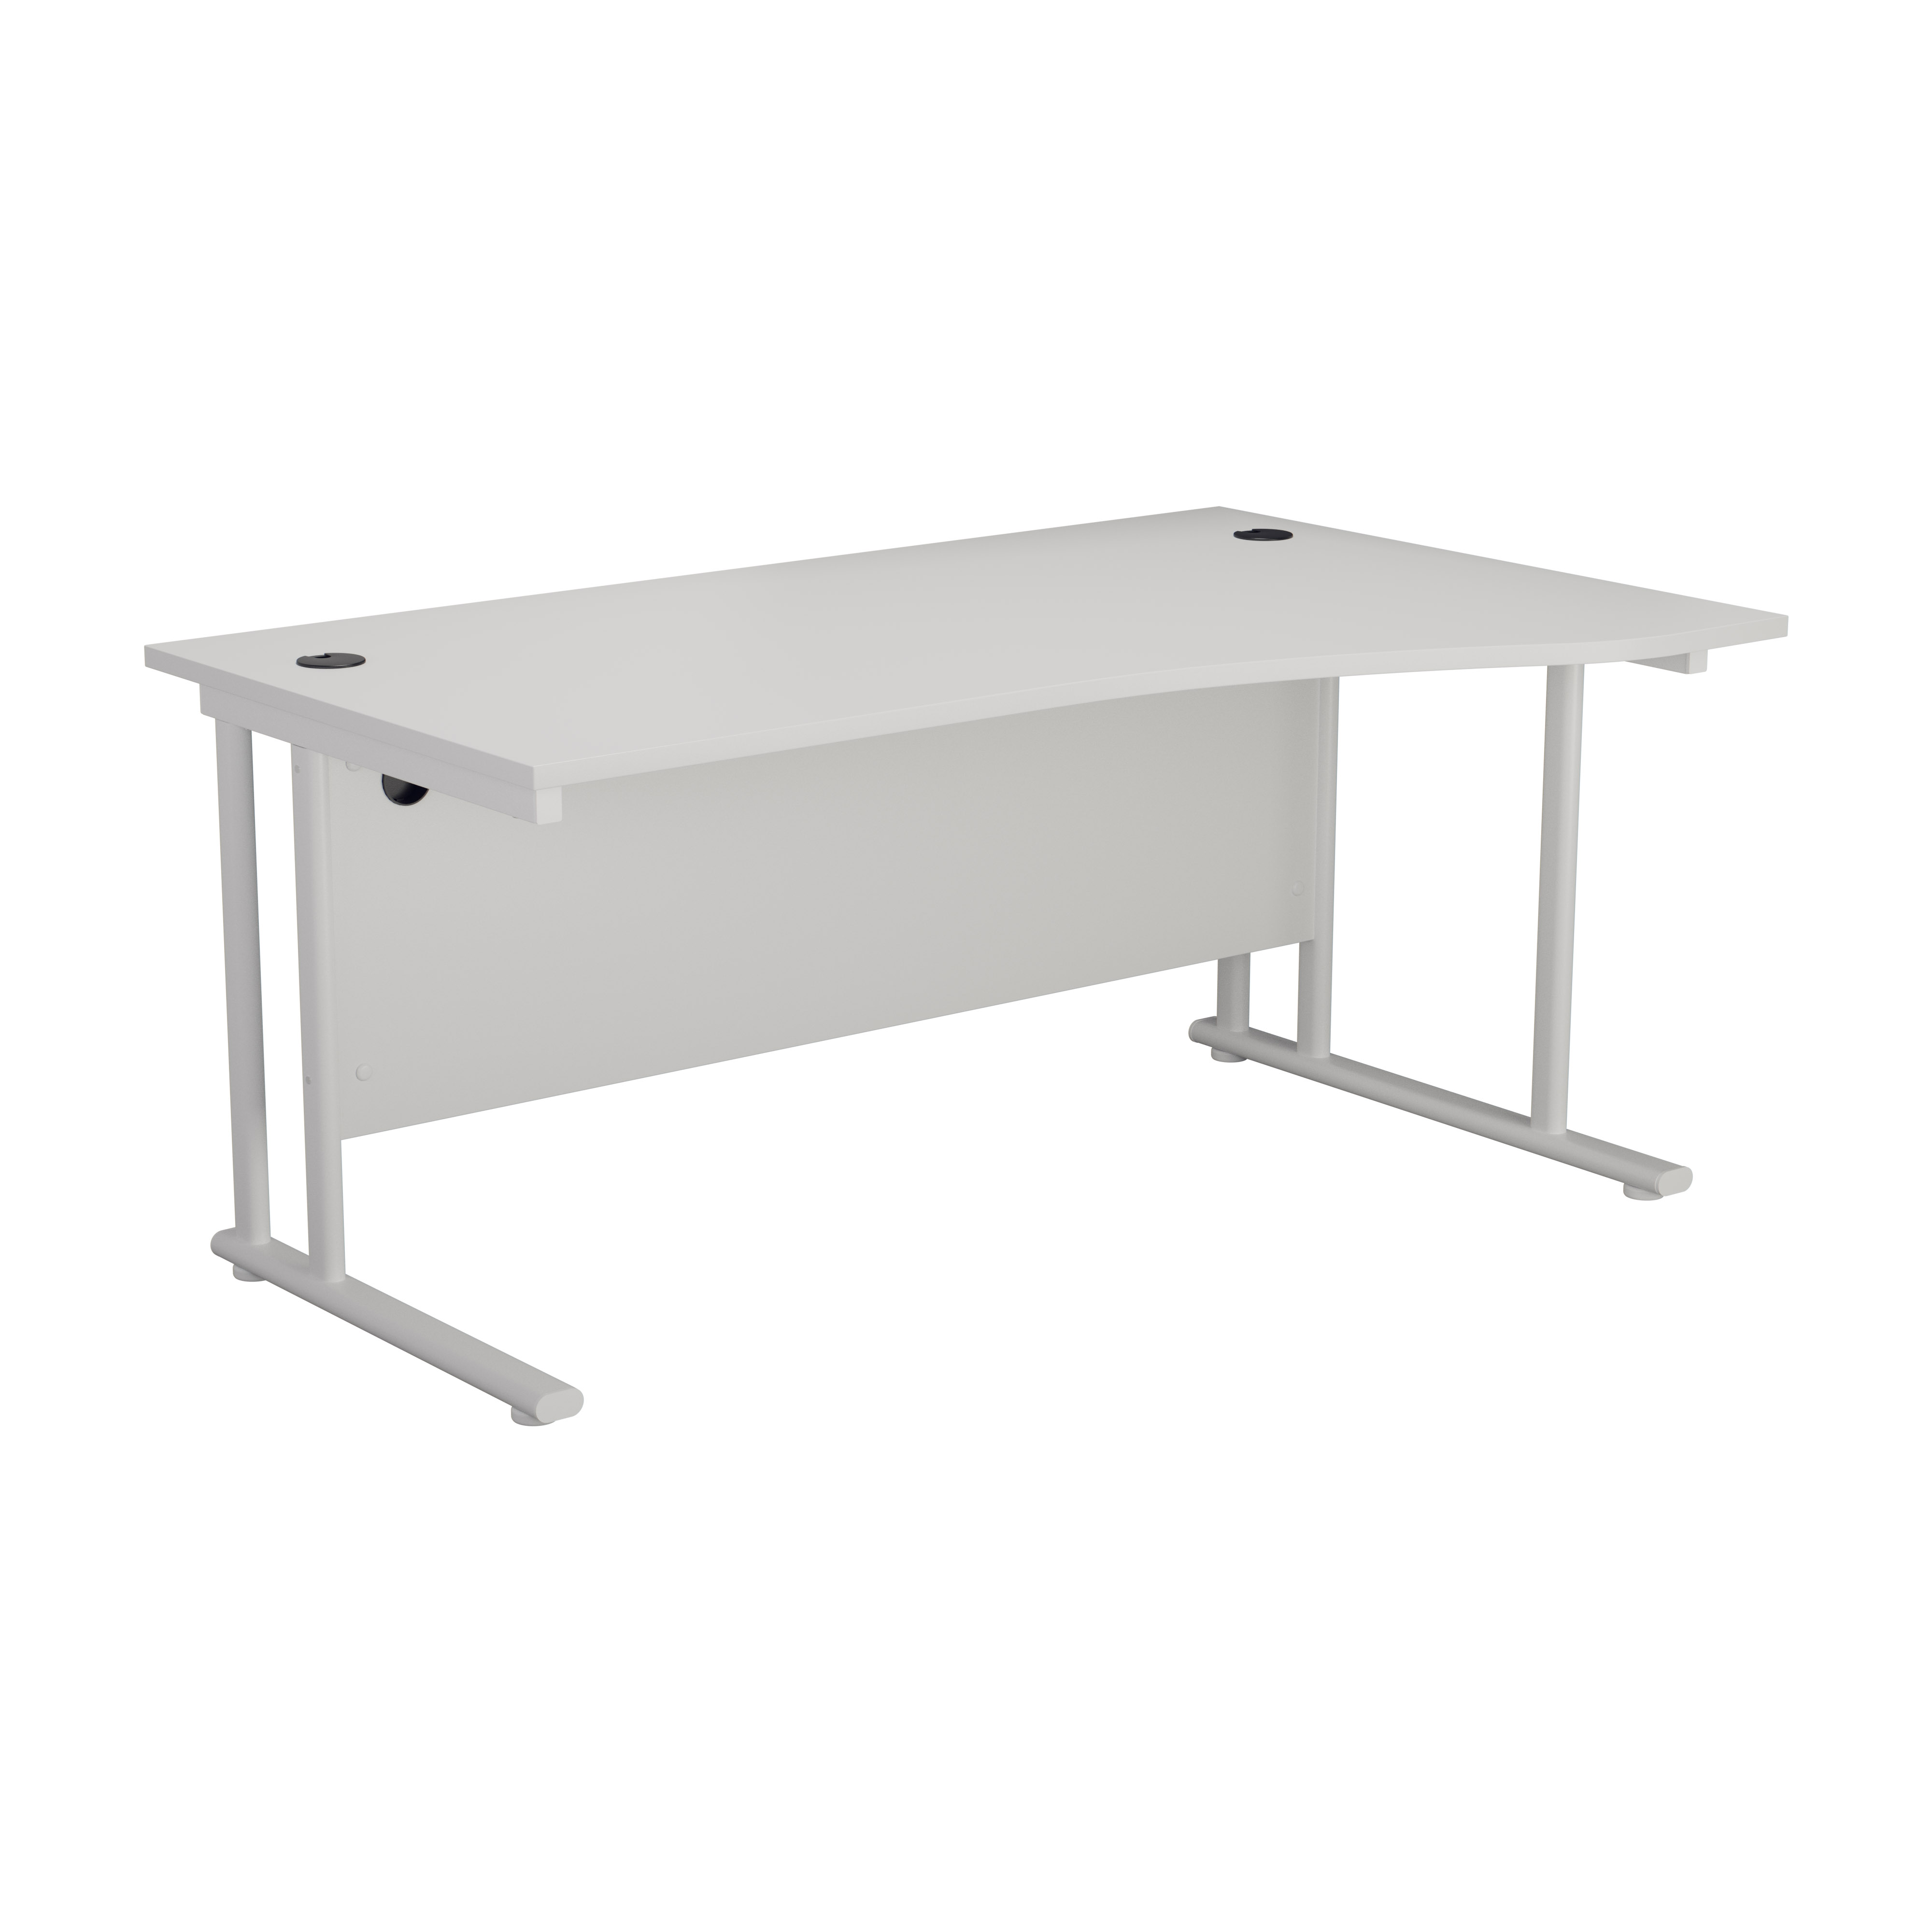 Start 1600 RH Hand Wave Cantilever Workstation - White Top and White Legs